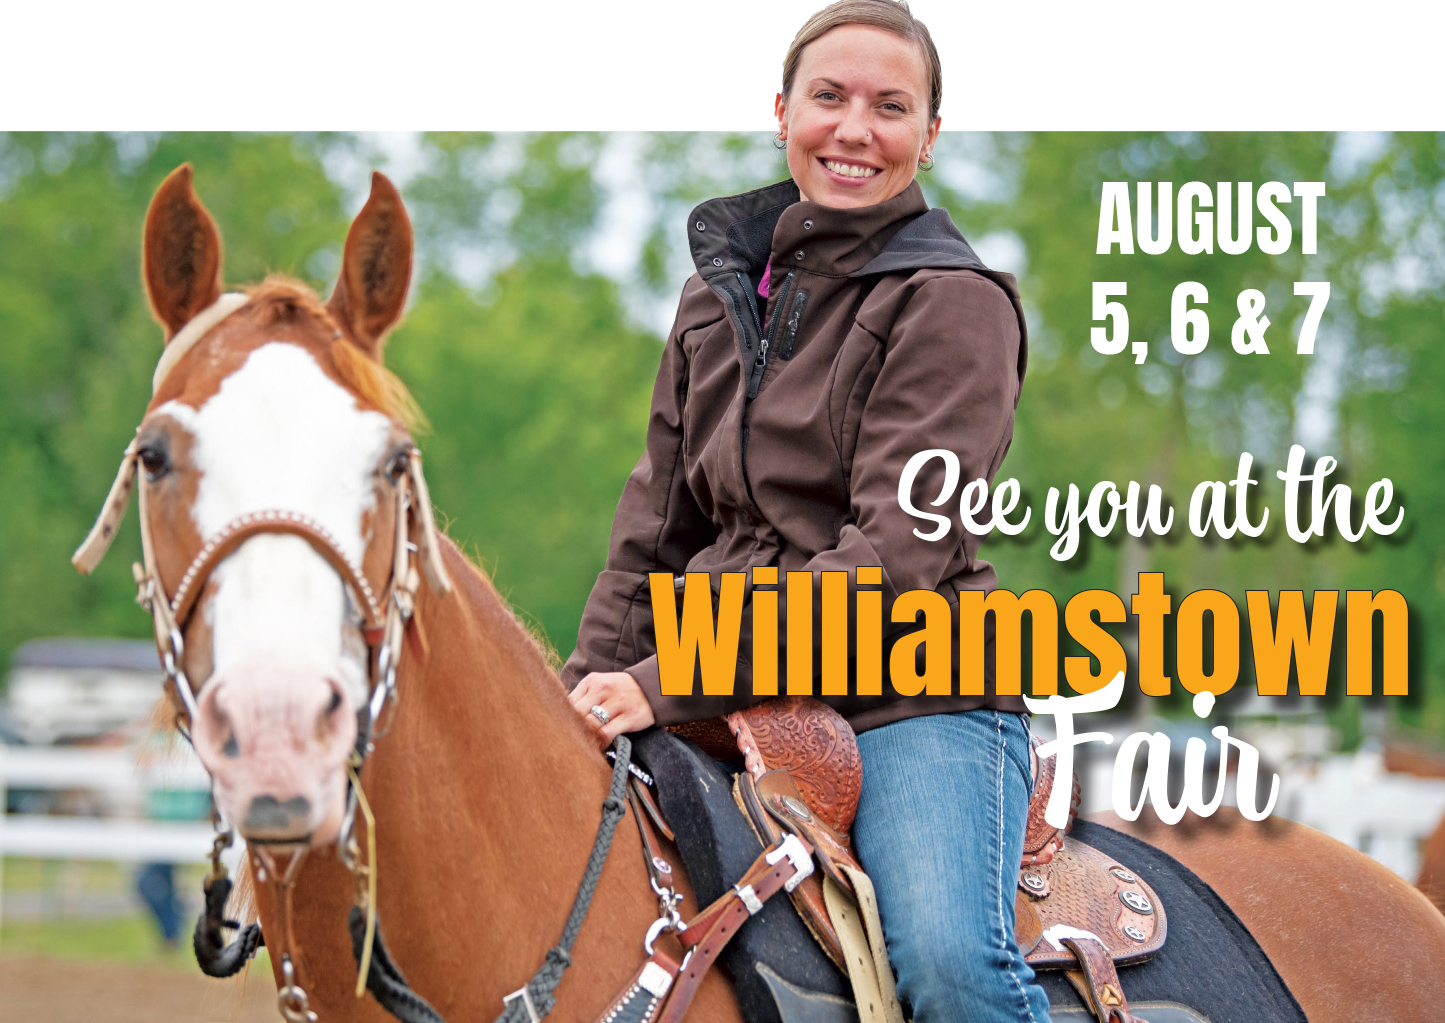 Welcome to the 211th Williamstown Fair